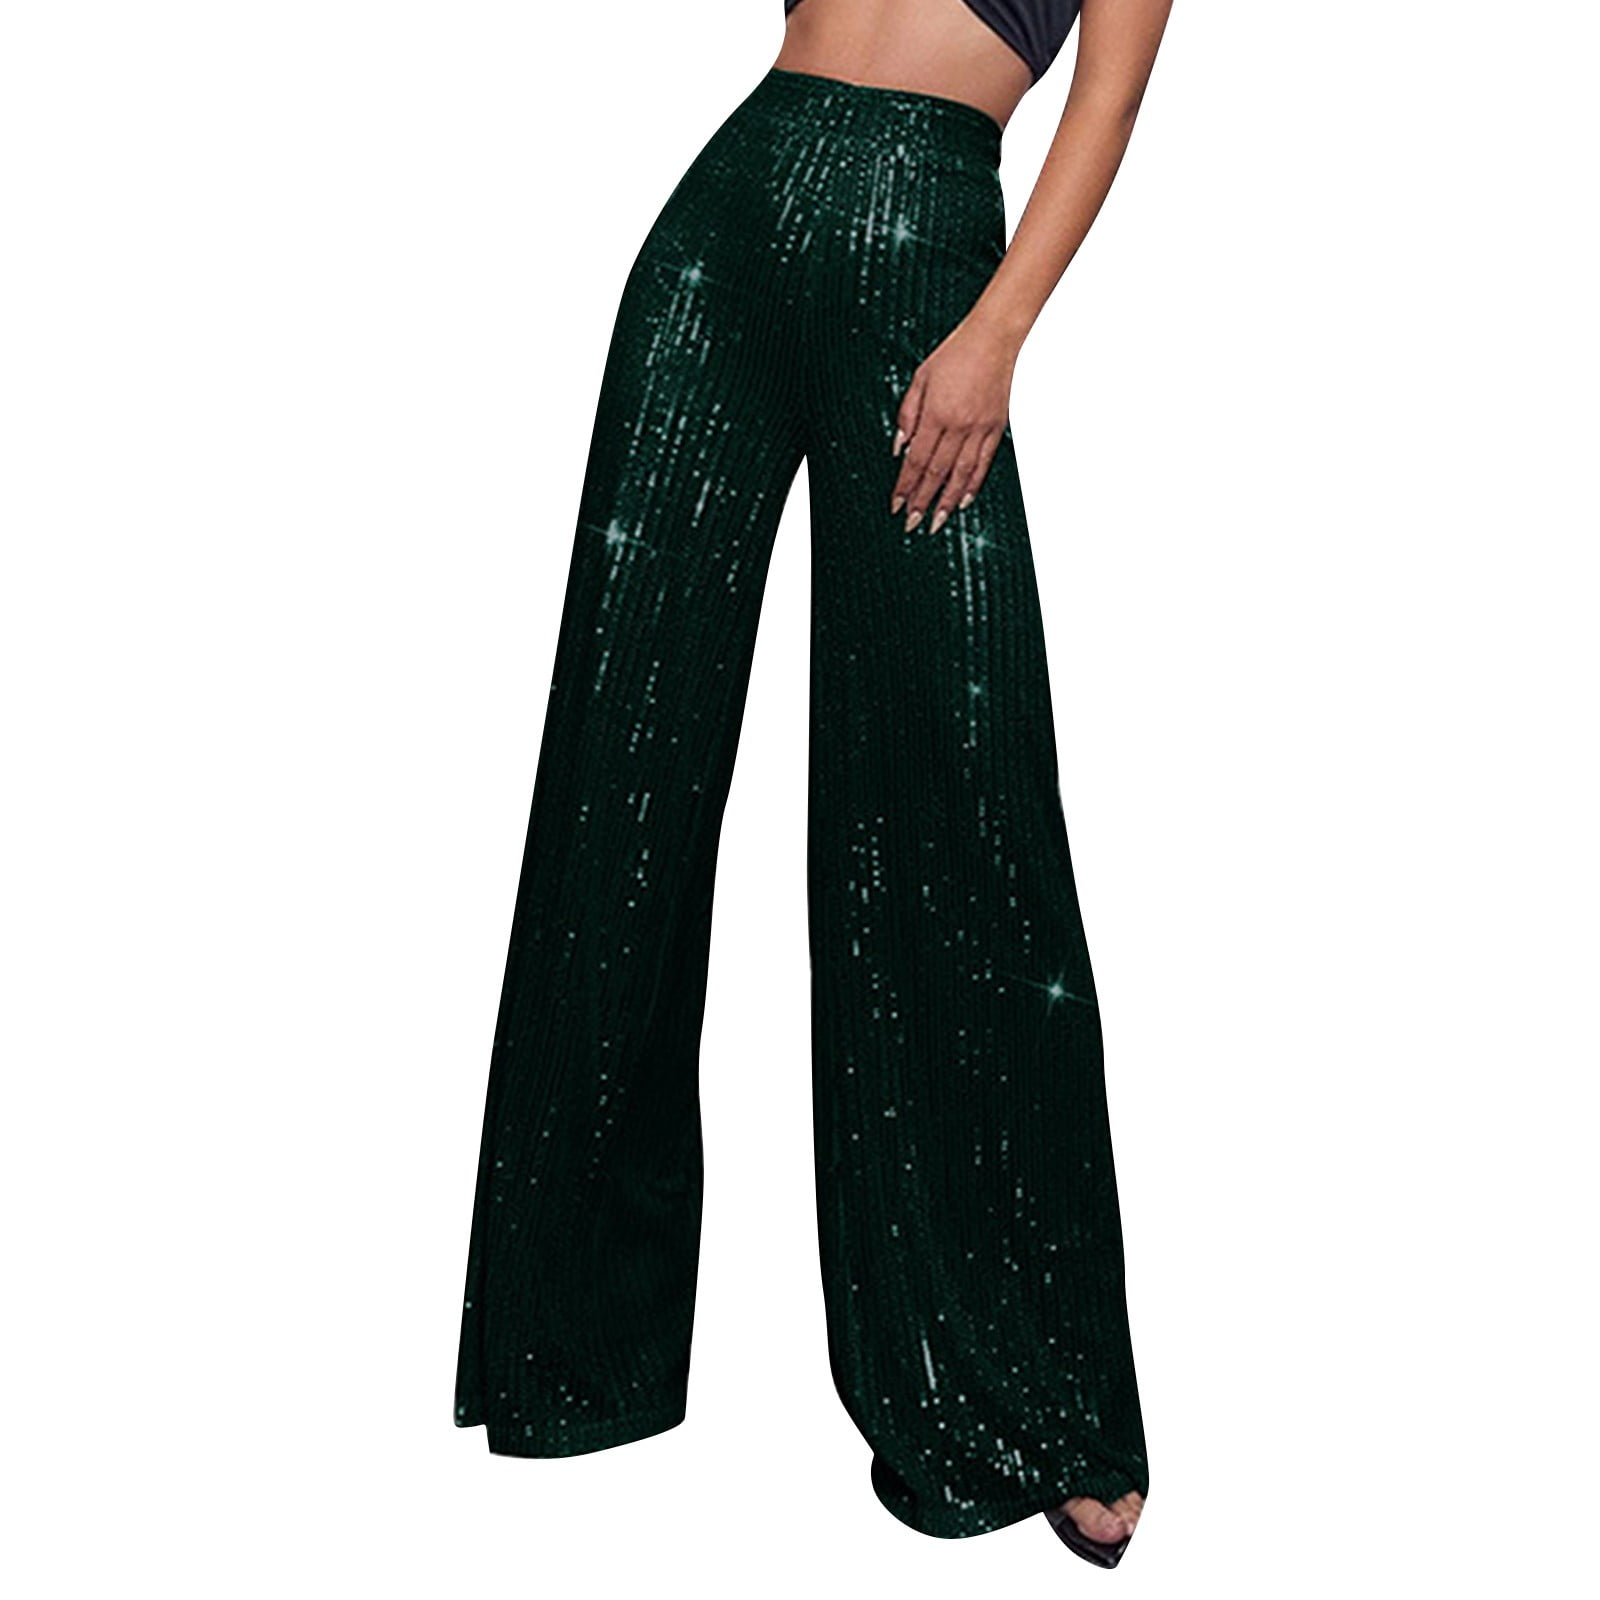 The 7 Best Party Pants to Buy Right Now